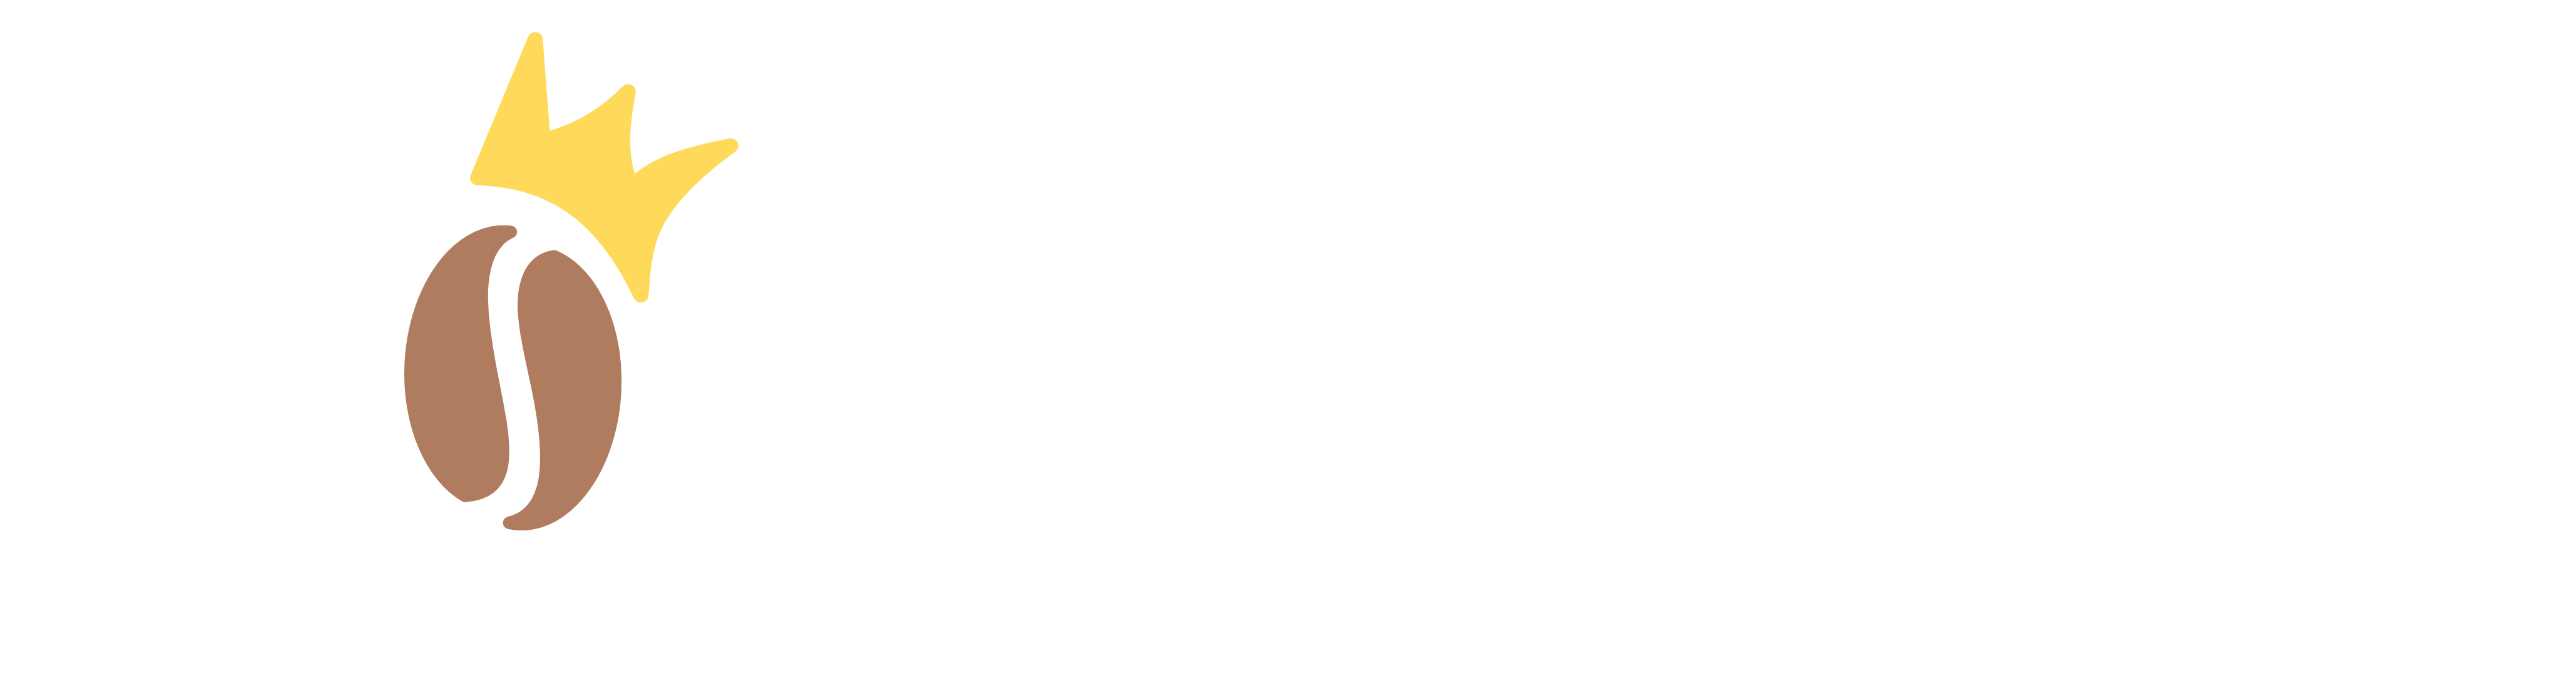 Logo for coffee kingz: a regal blend of typography and imagery, with a stylized coffee bean wearing a crown, signifying the brand's dominance in the coffee realm.